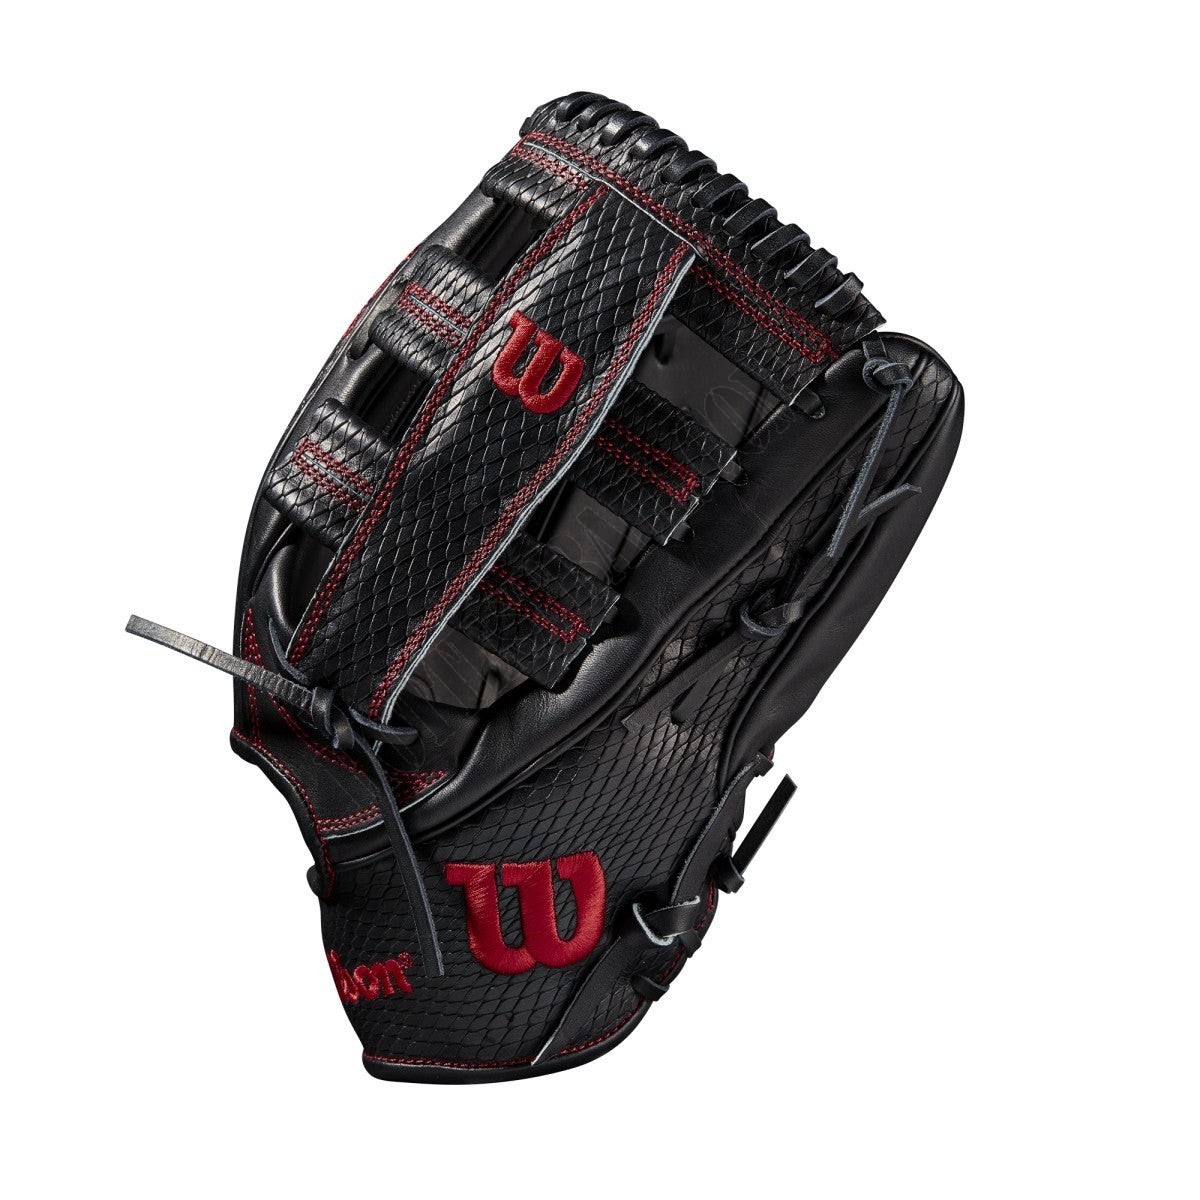 2021 A2K 1775SS 12.75" Outfield Baseball Glove ● Wilson Promotions - -3